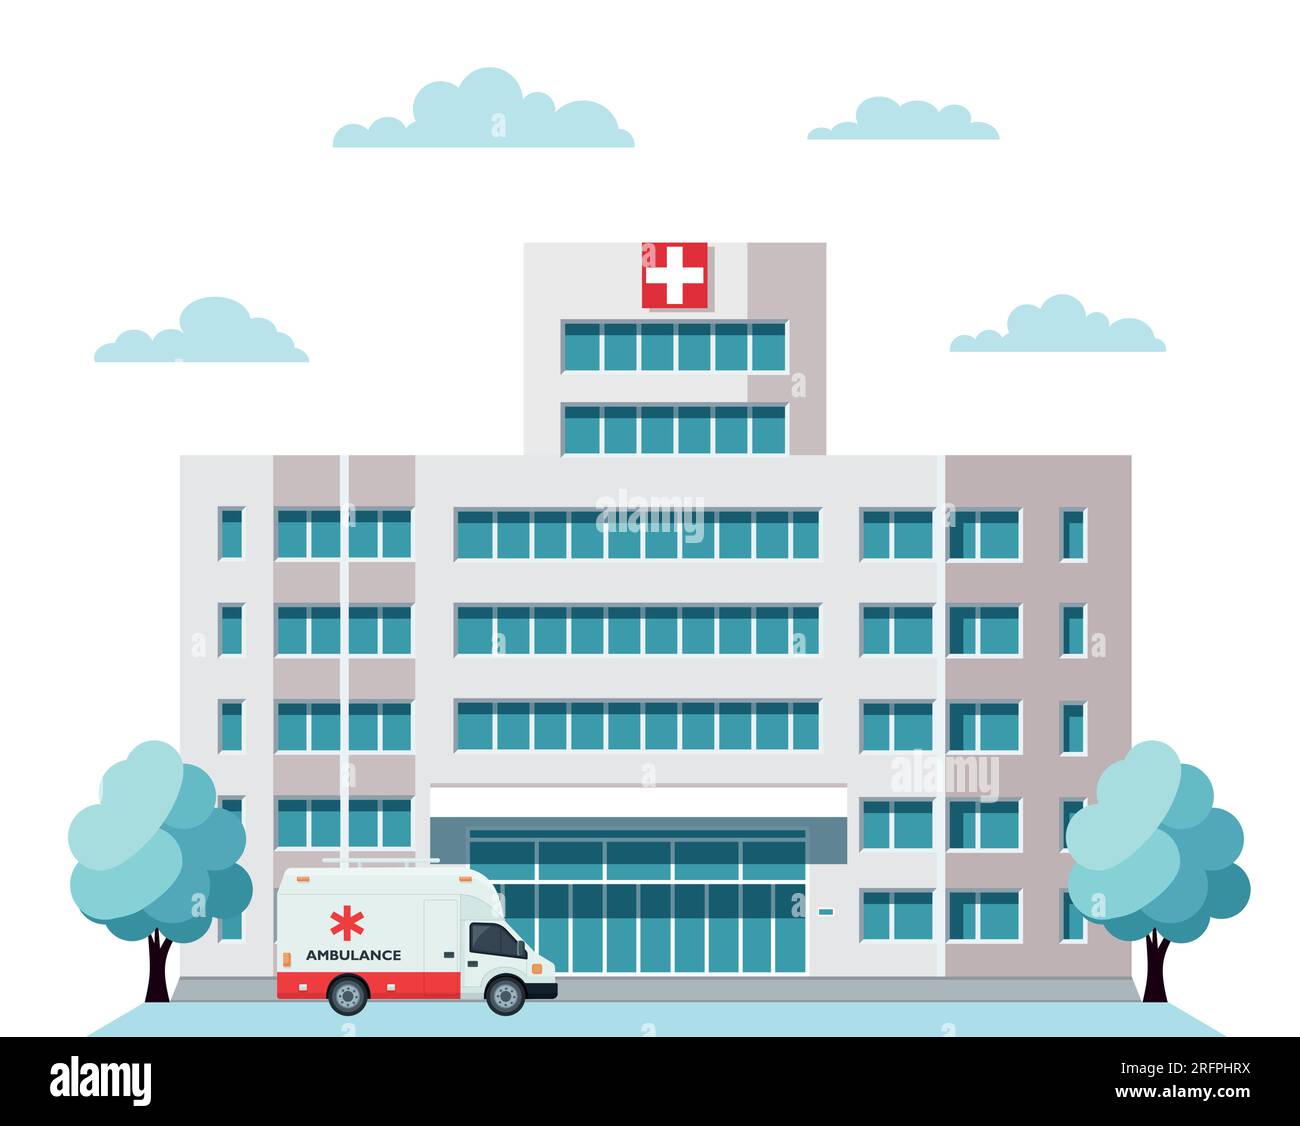 Medical hospital building exterior with city landscape and ambulance car. Vector illustration. Stock Vector